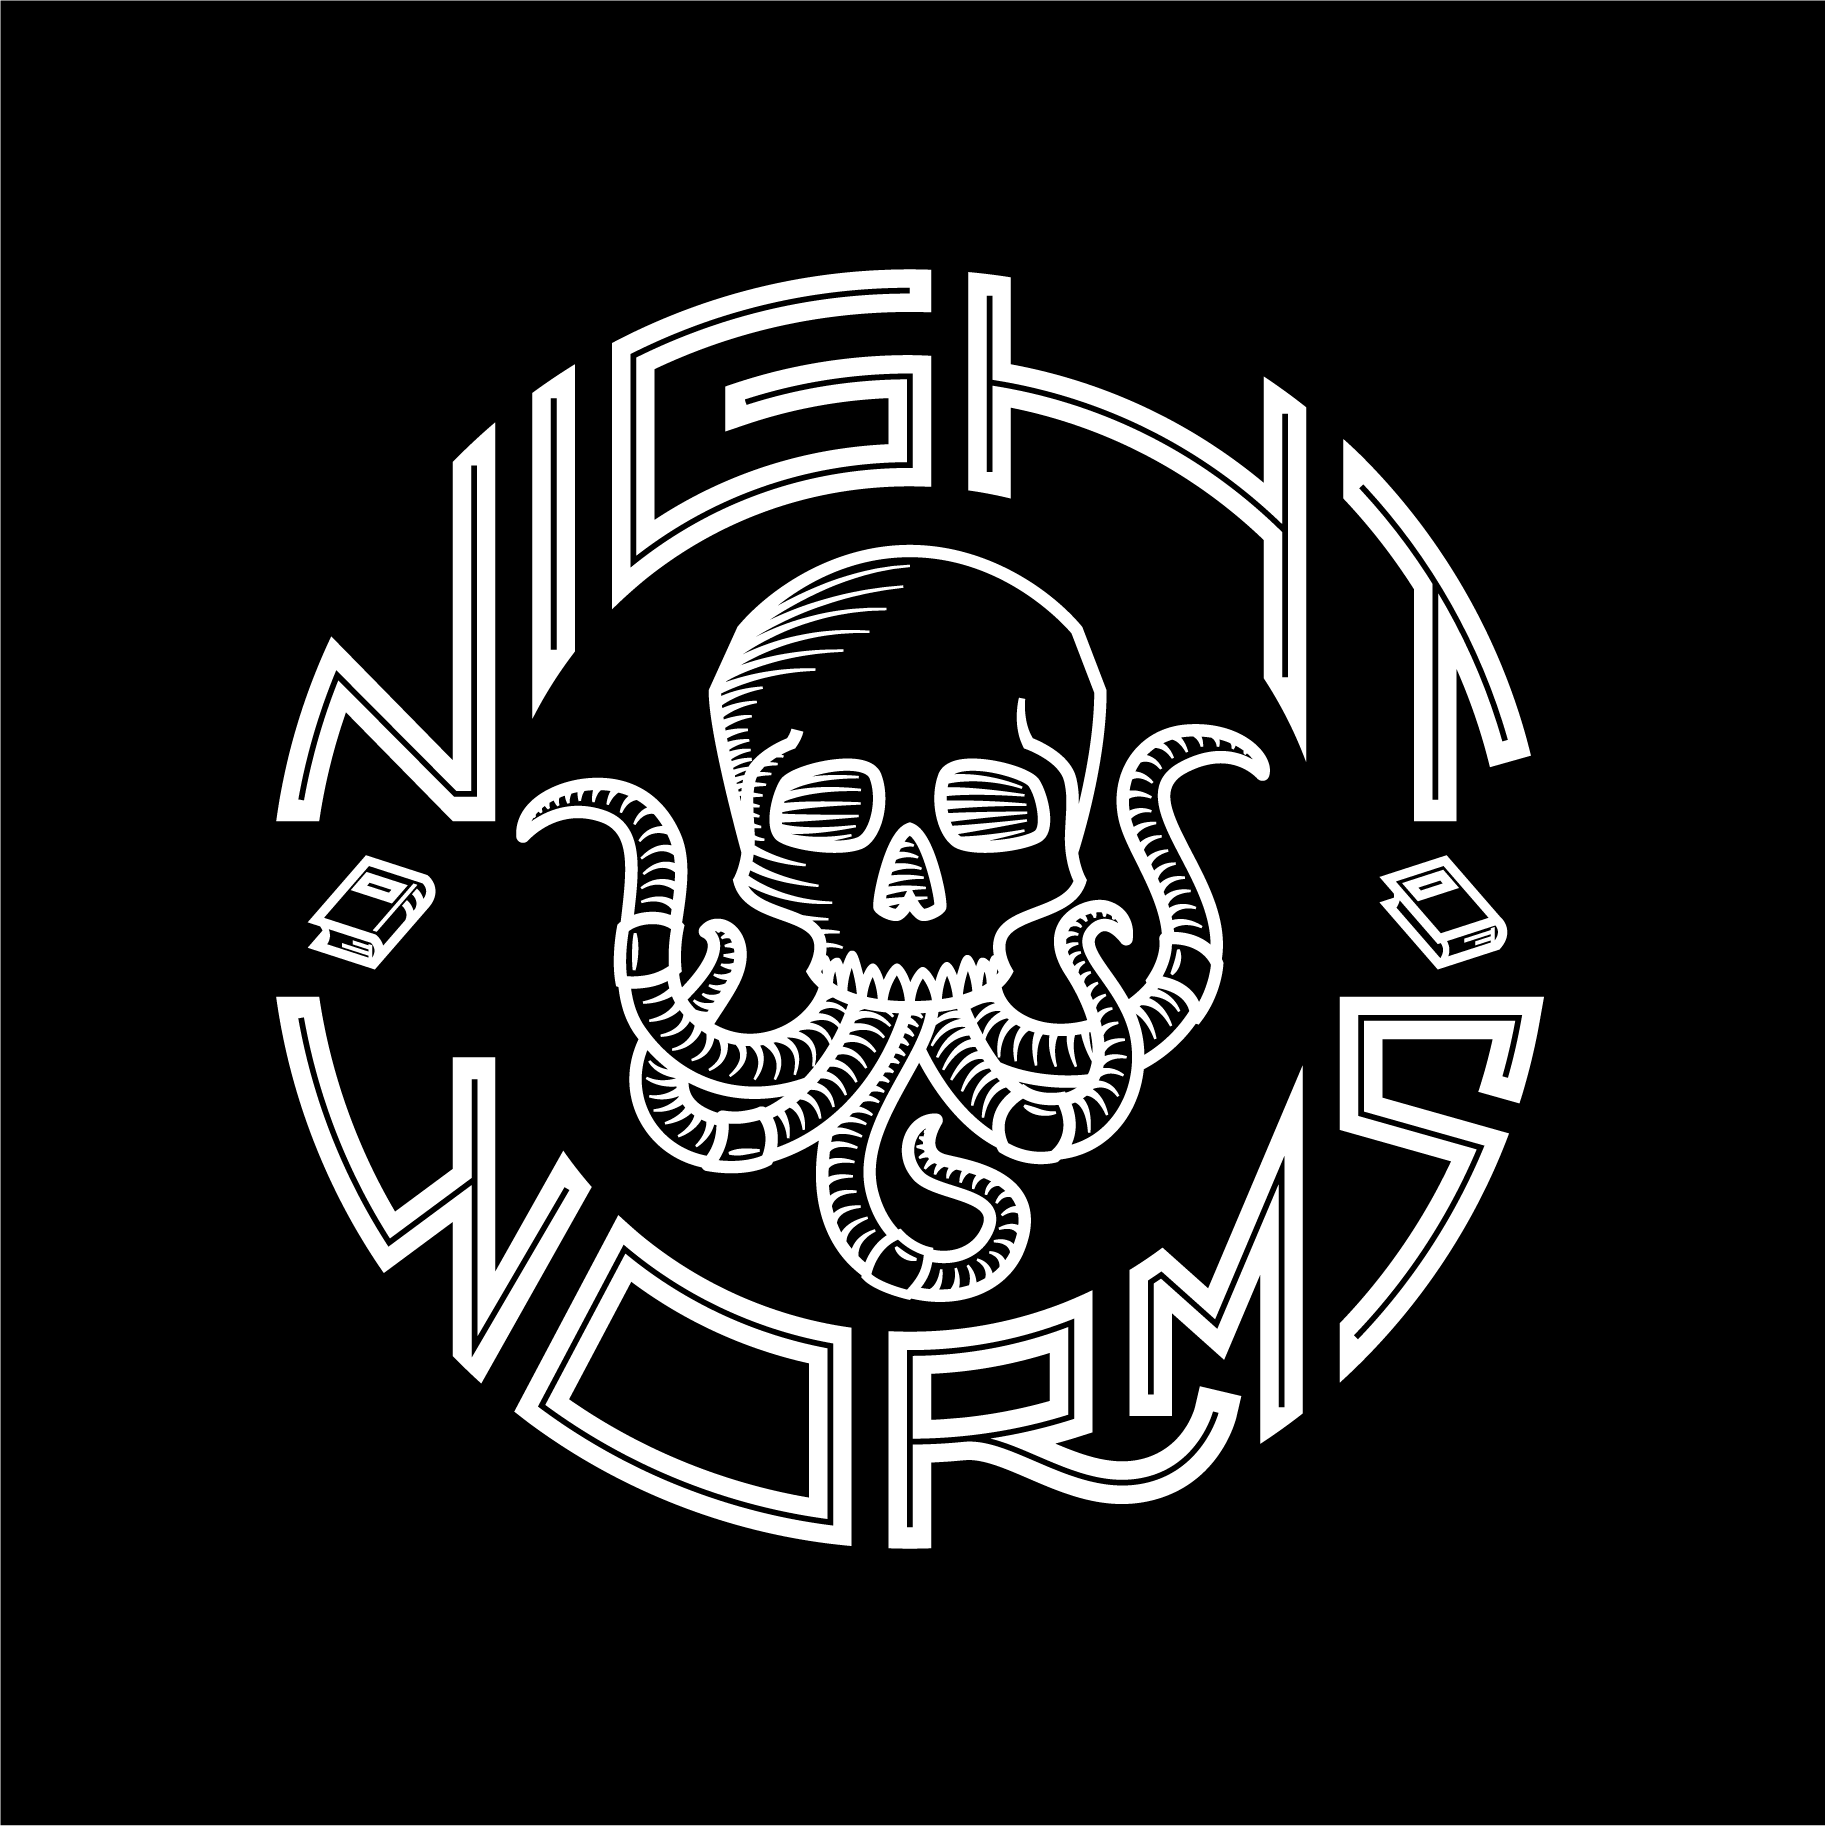 Night Worms & Reviews: Updated Review Policy